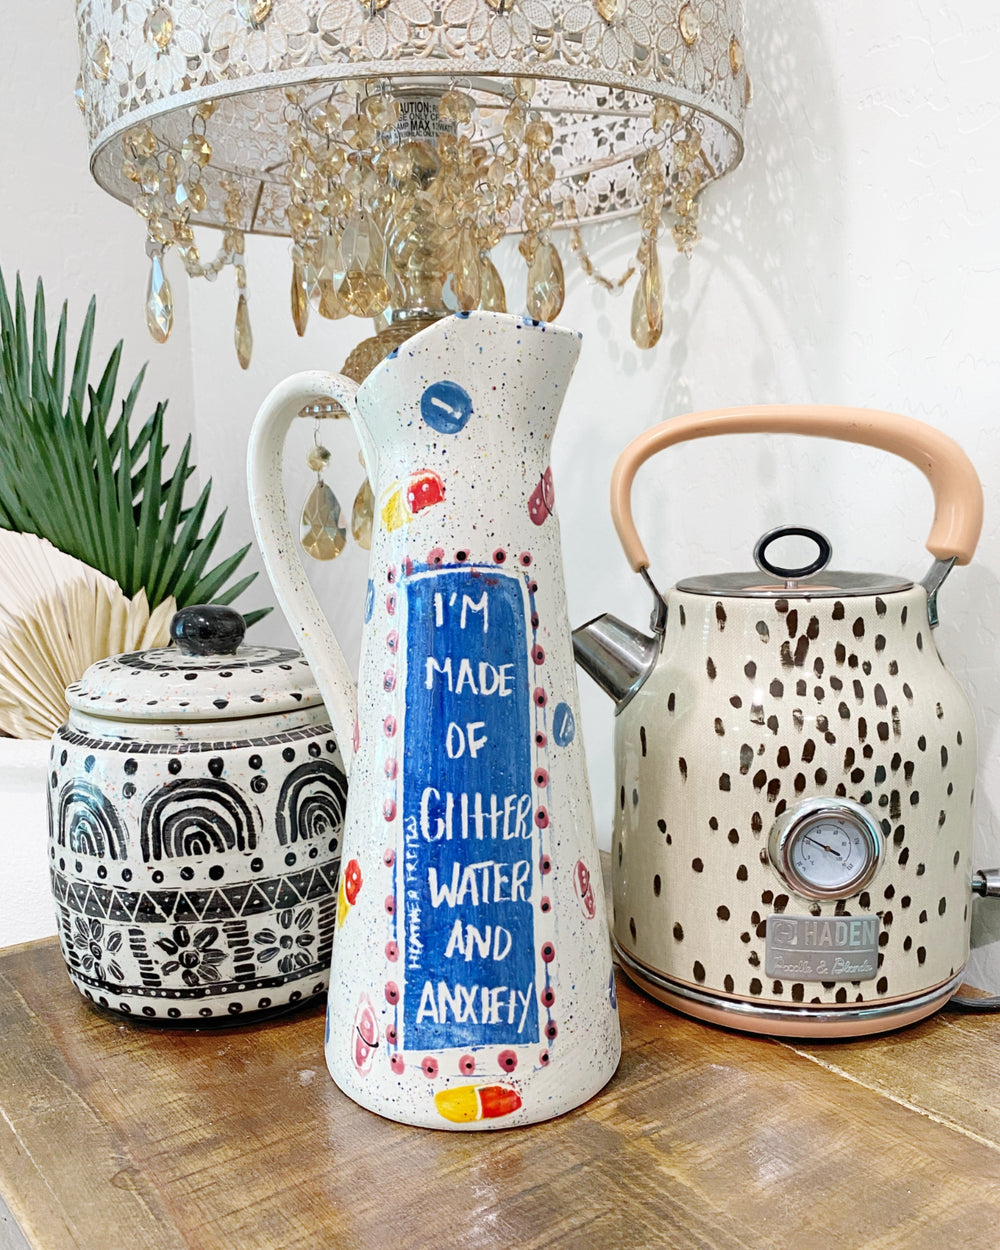 I Am Filled With Glitter, Sugar & Anxiety Pitcher ( hand painted glaze ) - Heather Freitas - fine art home deccor